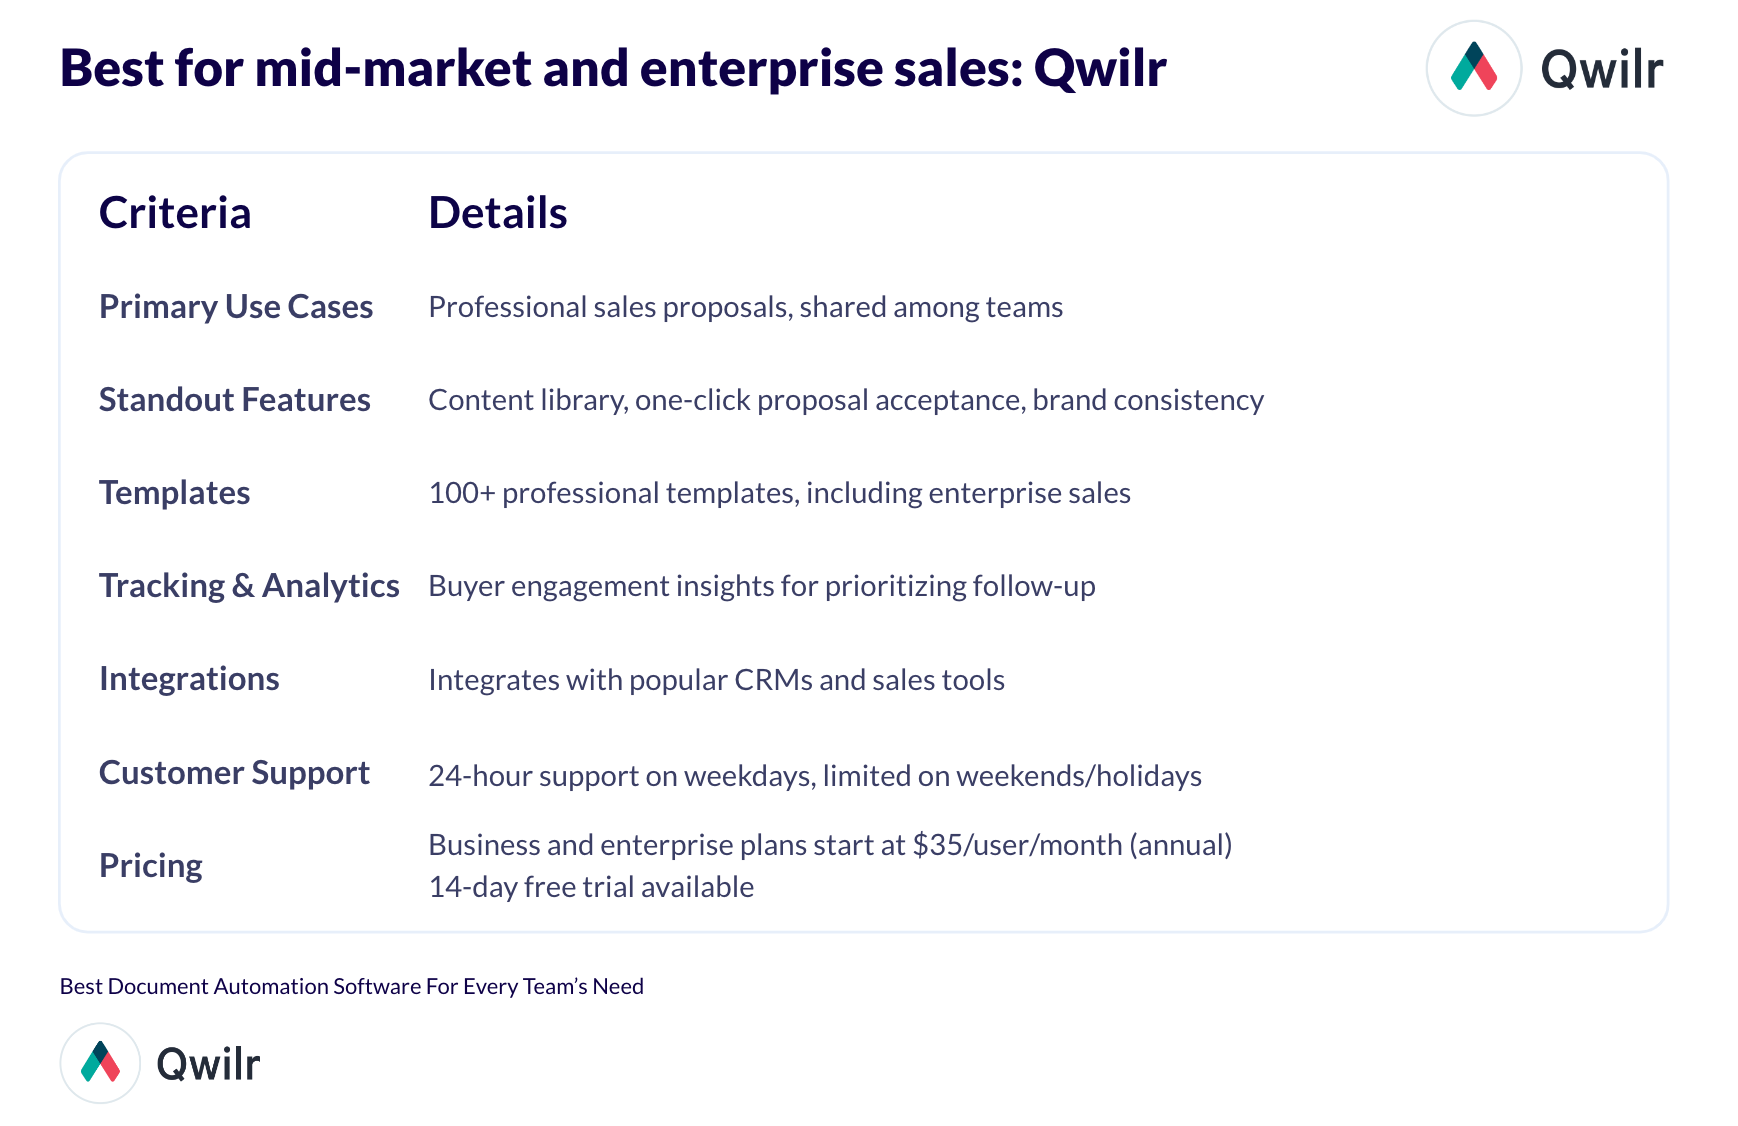 Best for mid-market and enterprise sales: Qwilr